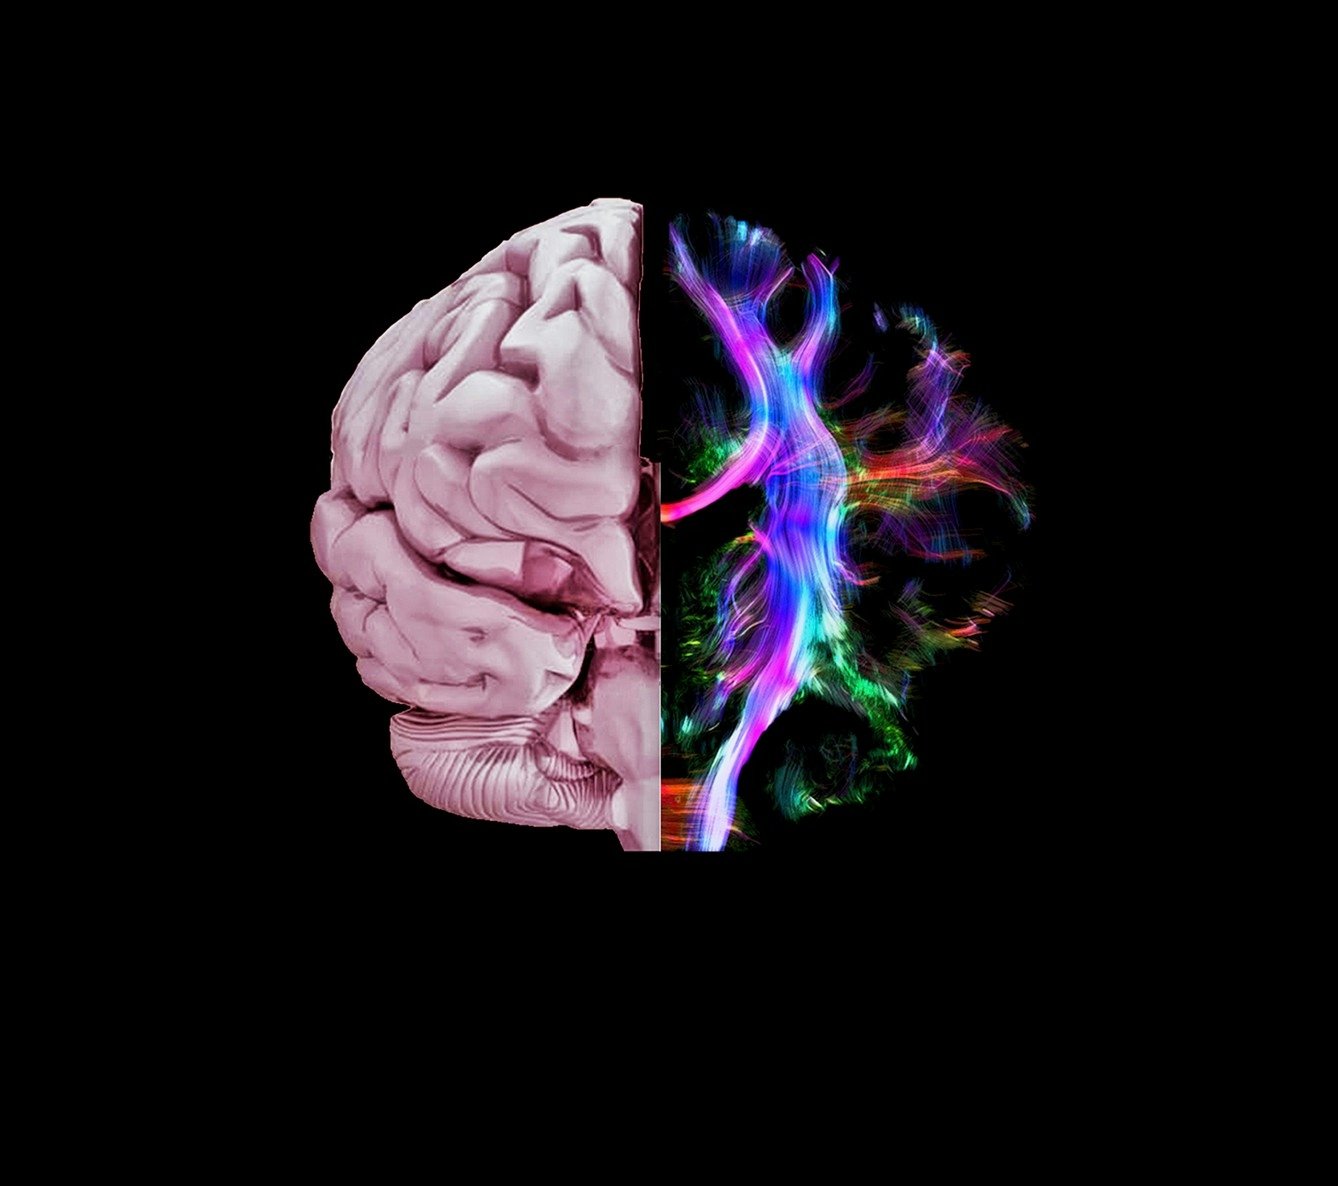 Colour image of brain, one half is pale pink and three-dimensional, the other half is a more abstract swirl of colour lights. Image on black background.